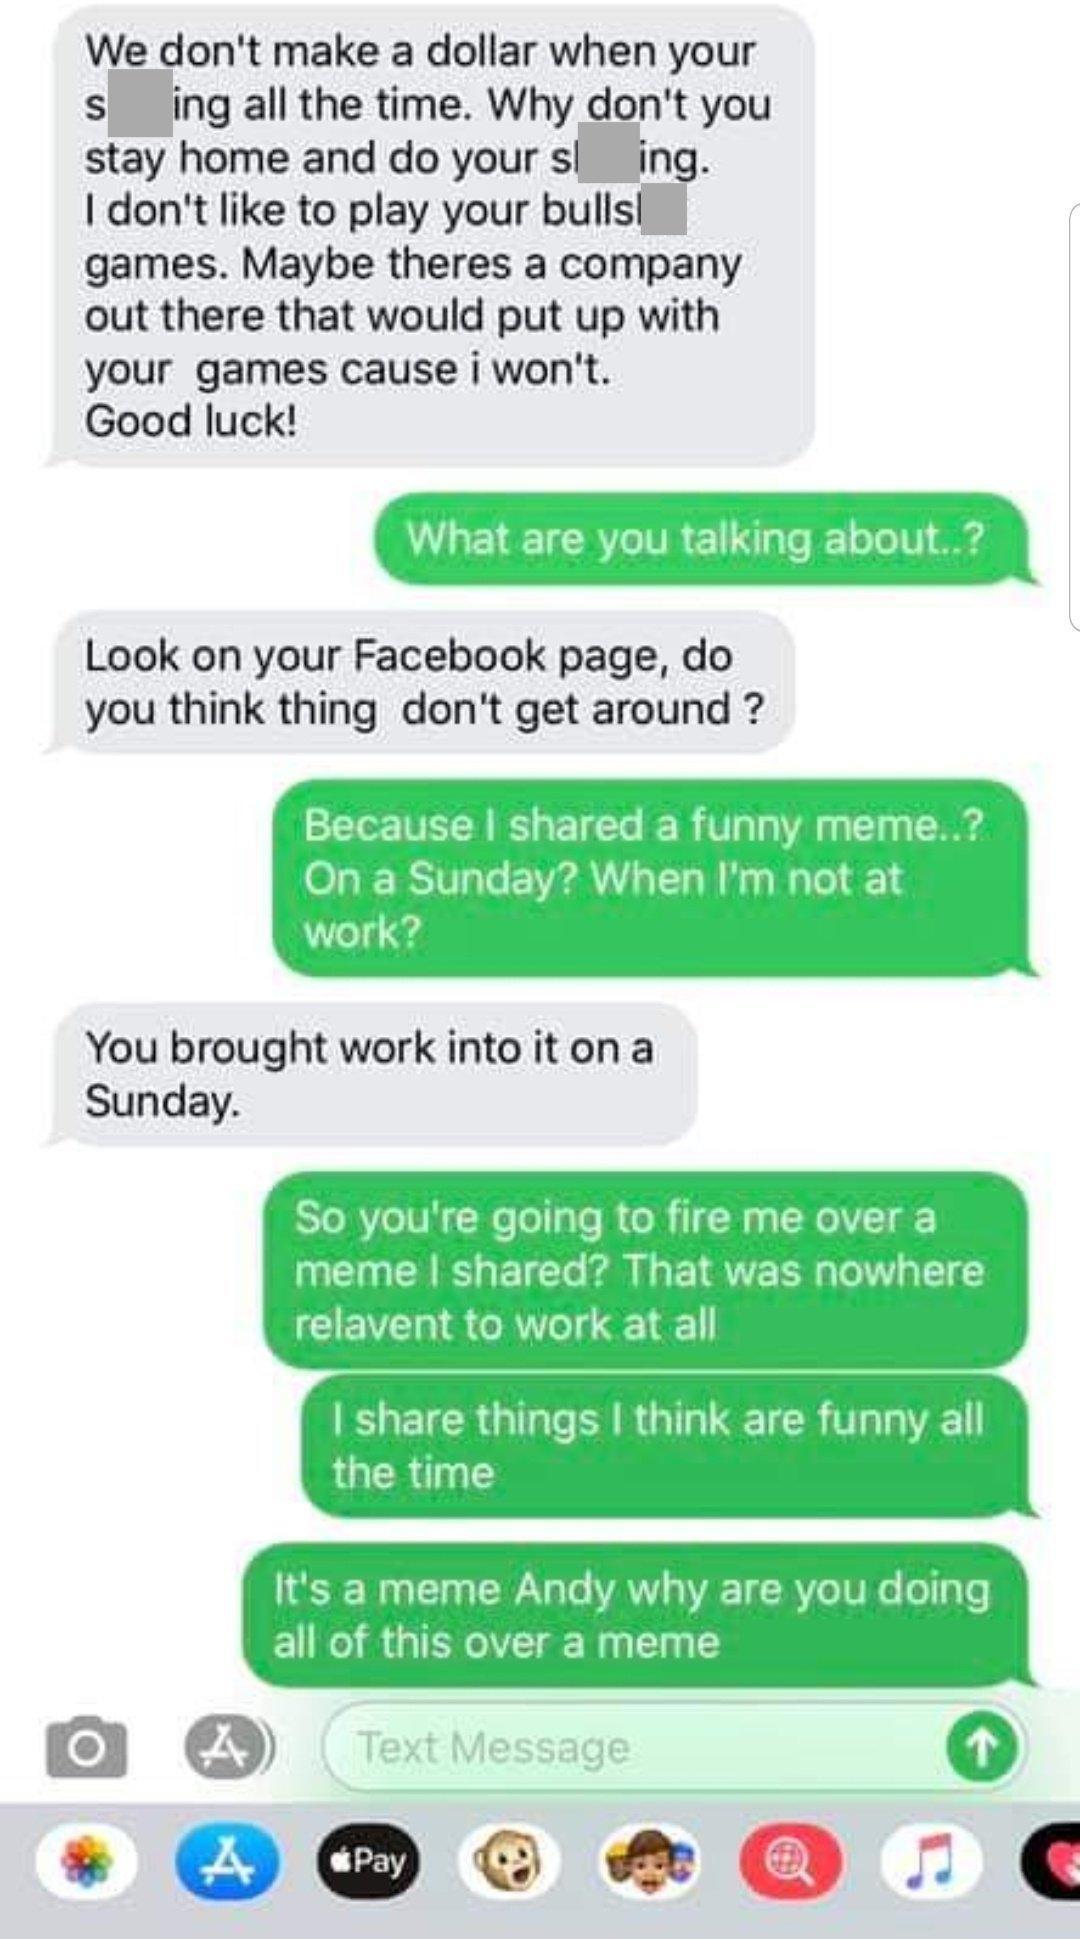 Guy got fired for posting a meme about pooping at work